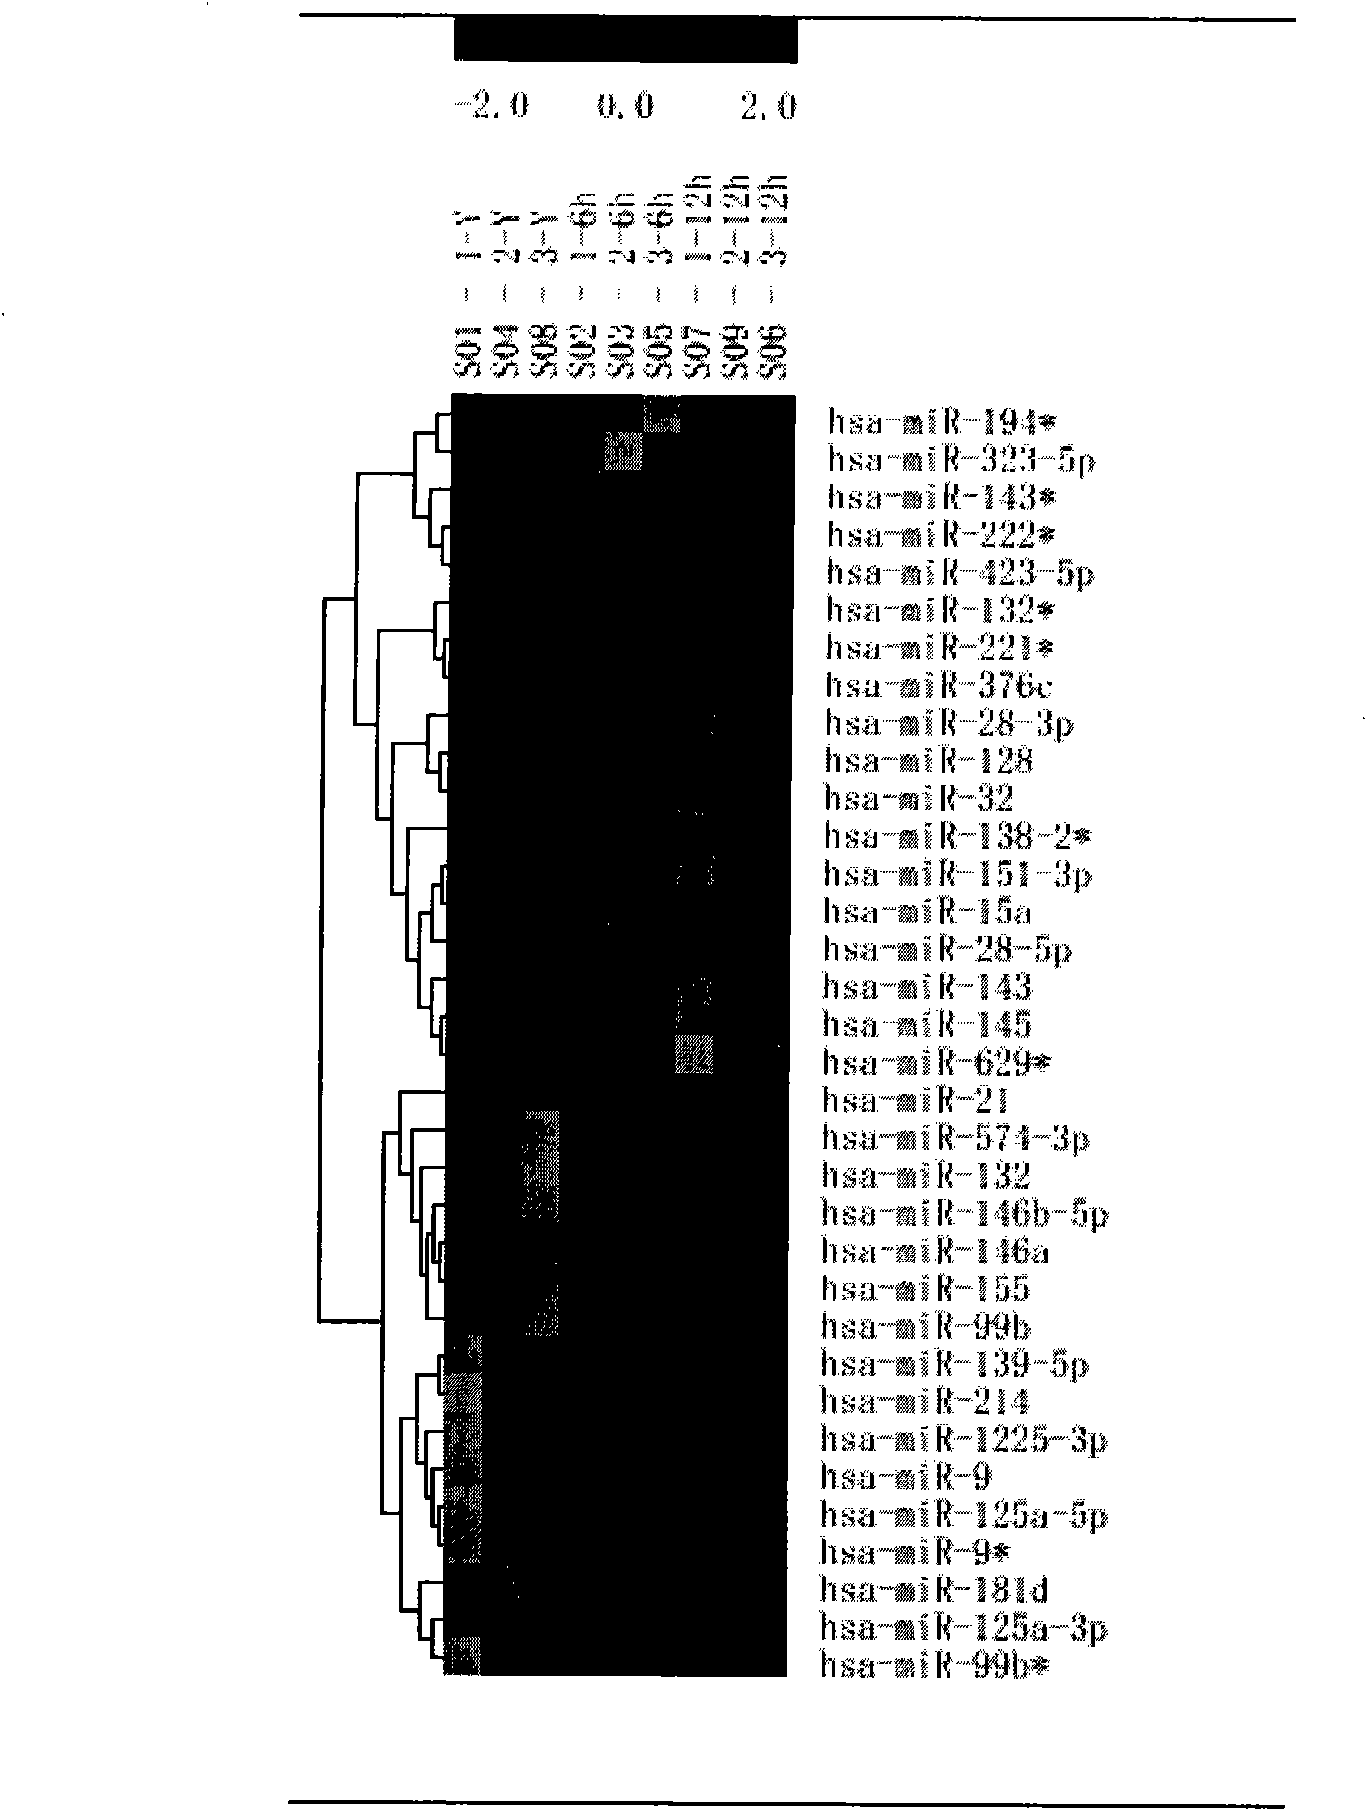 Method for screening atherosclerosis related miRNA